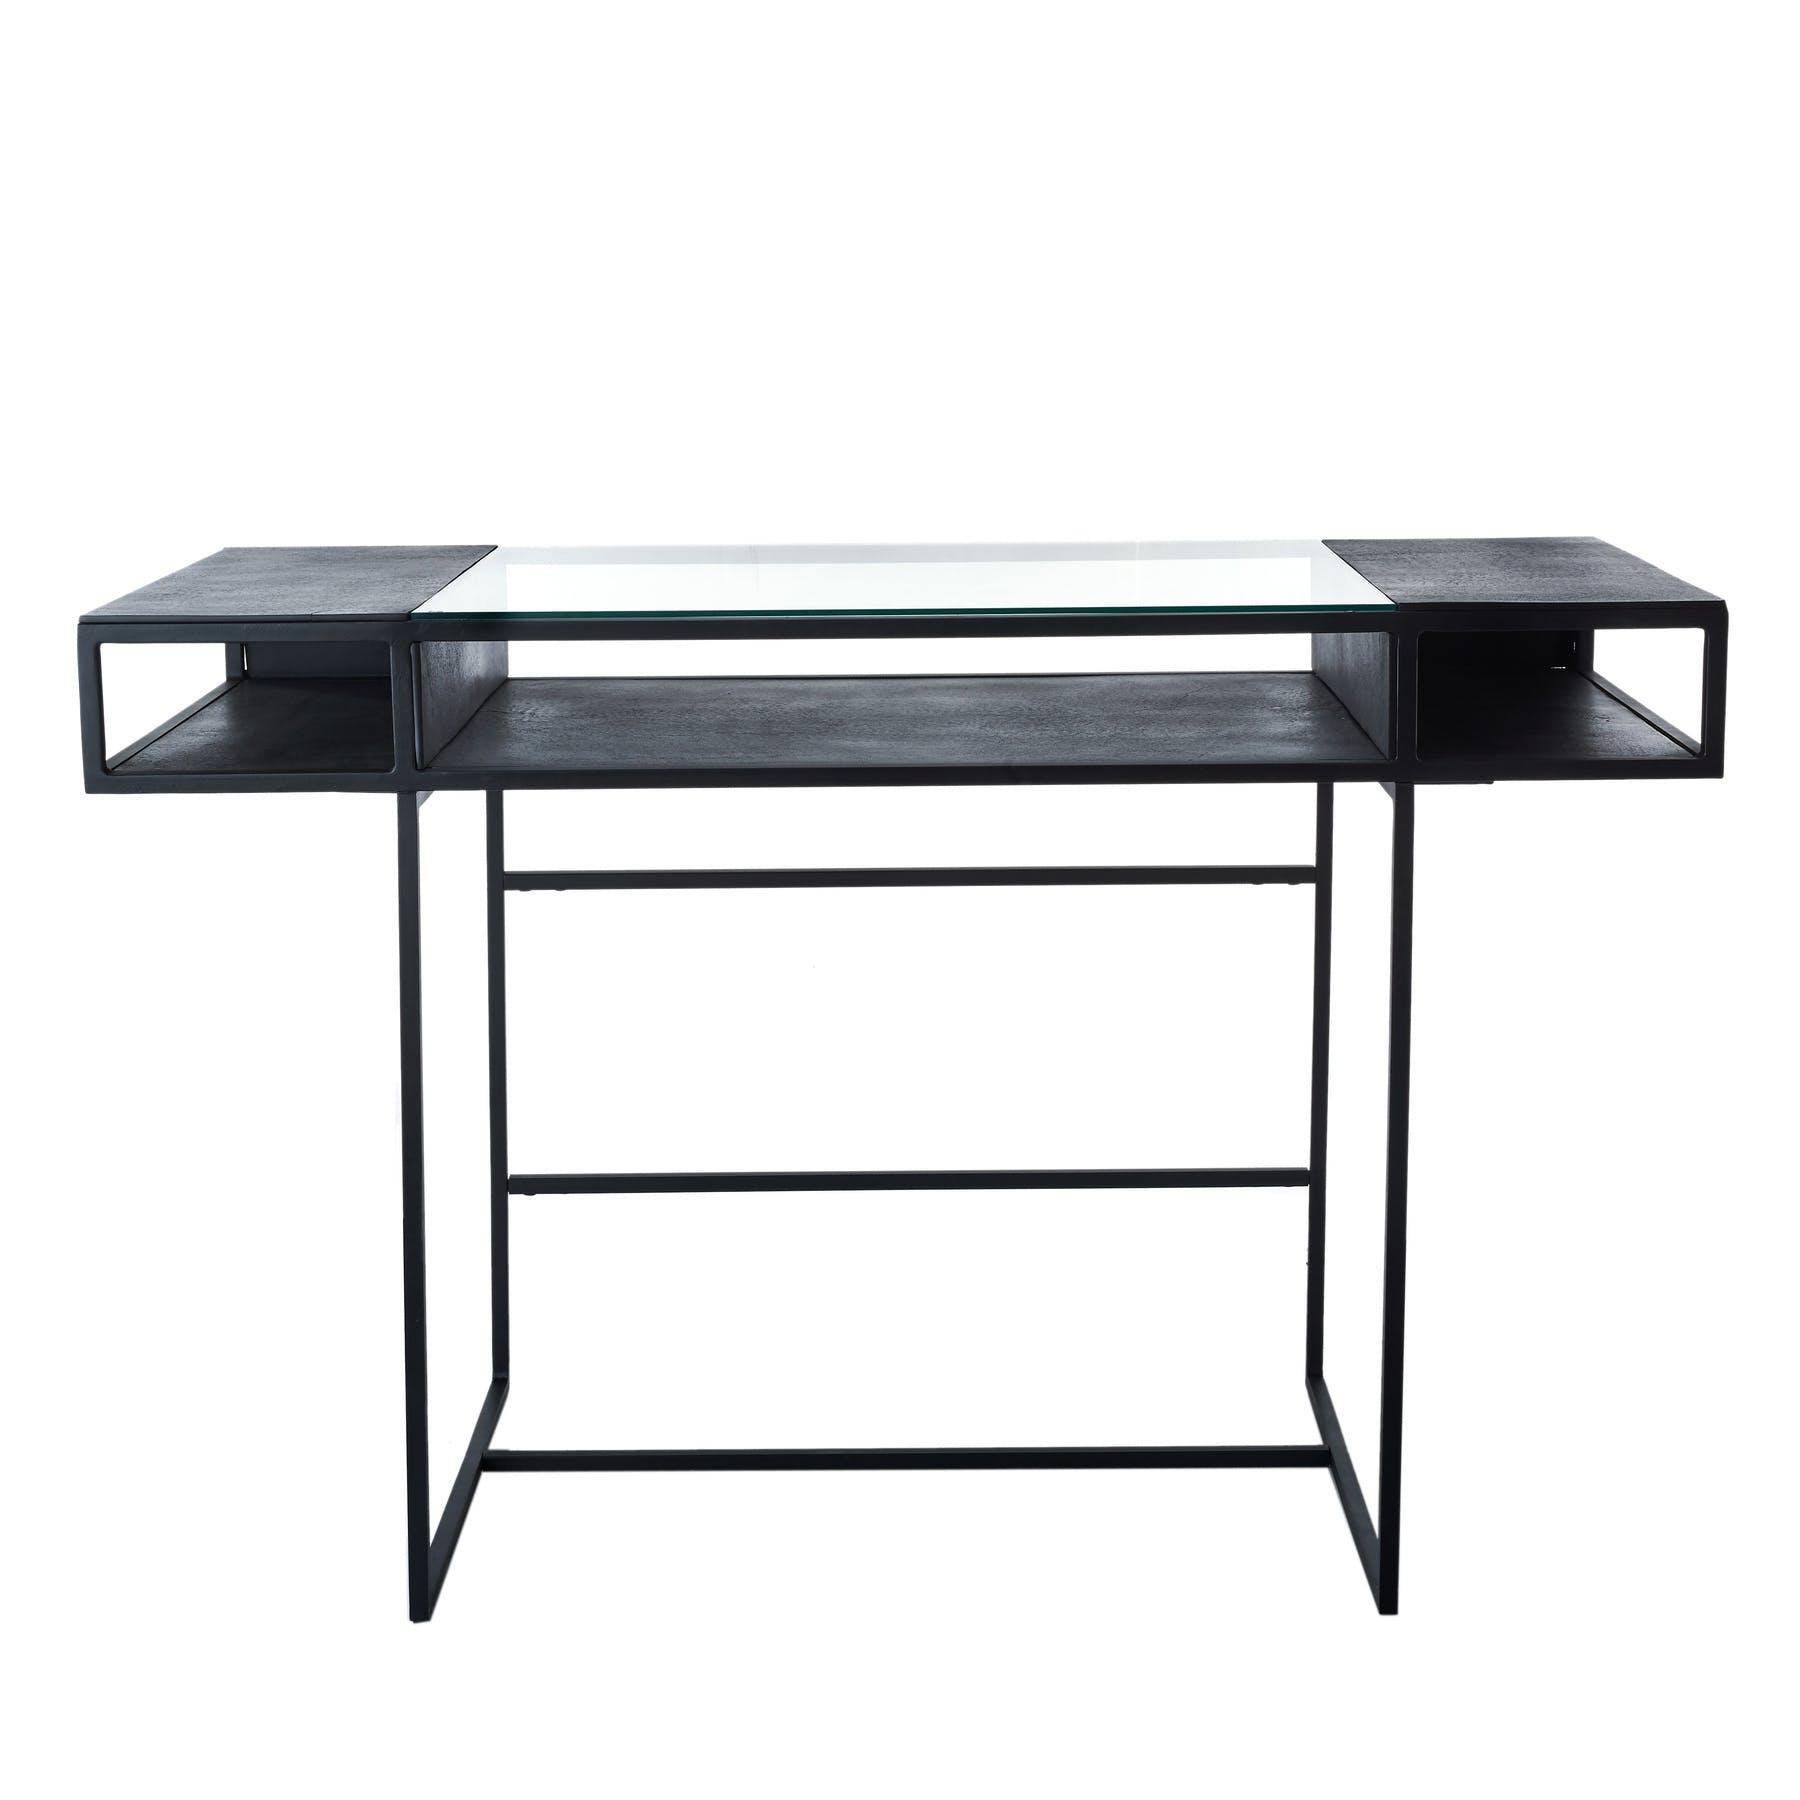 Graphite secretaire desk - Pols Potten Studio
Dimensions: W119 x D59 x H75.5 cm
Materials: Black powder coated iron frame, graphite plated aluminium top


Pols Potten products are characterised by a modern twist on Traditional Design. Each of